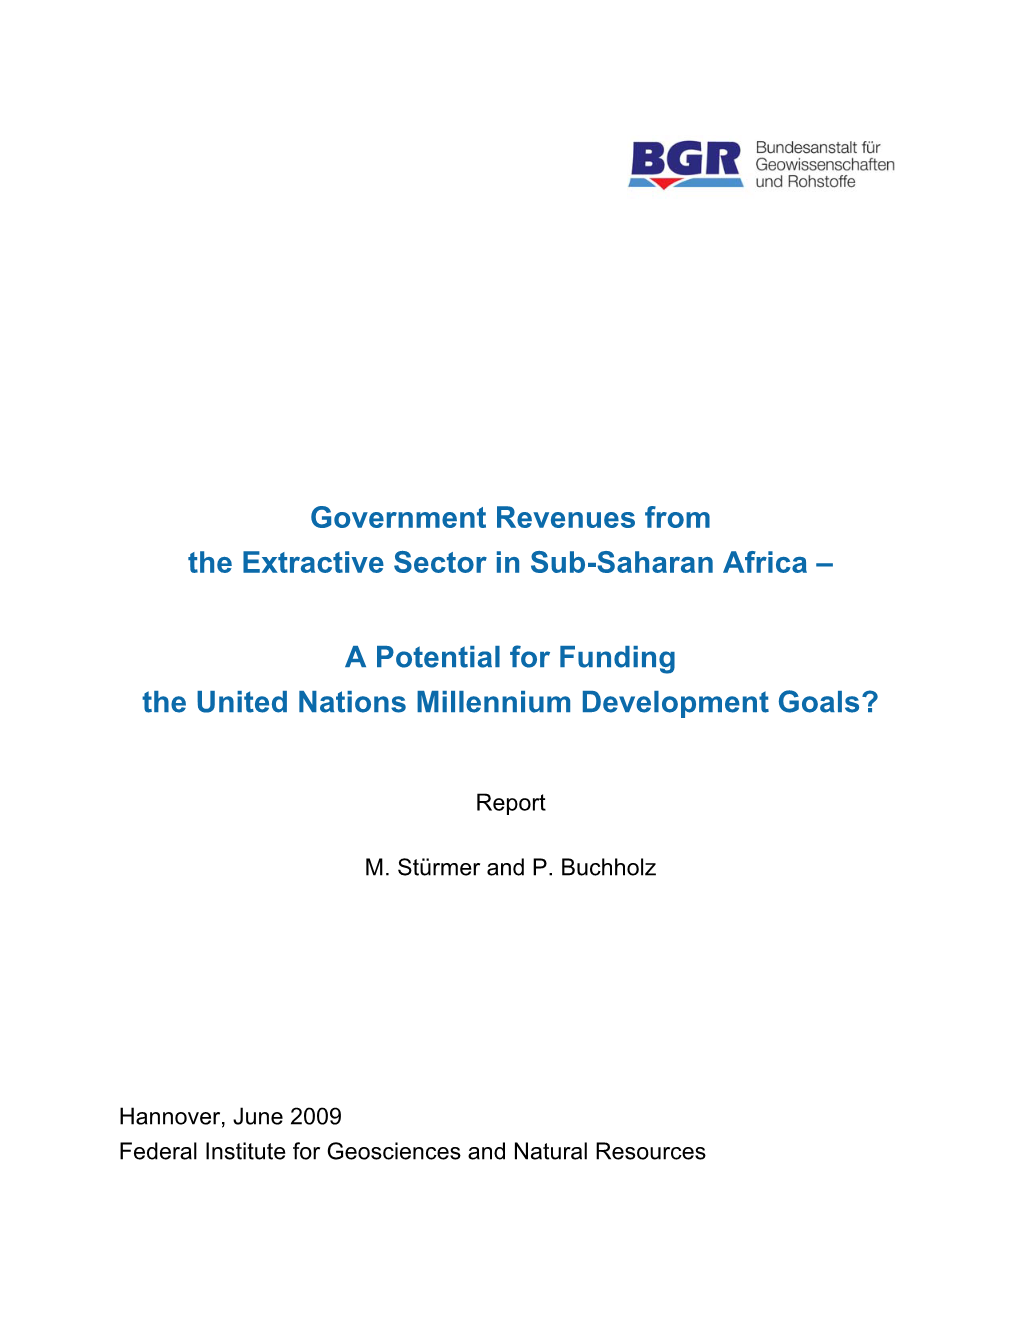 Government Revenues from the Extractive Sector in Sub-Saharan Africa –